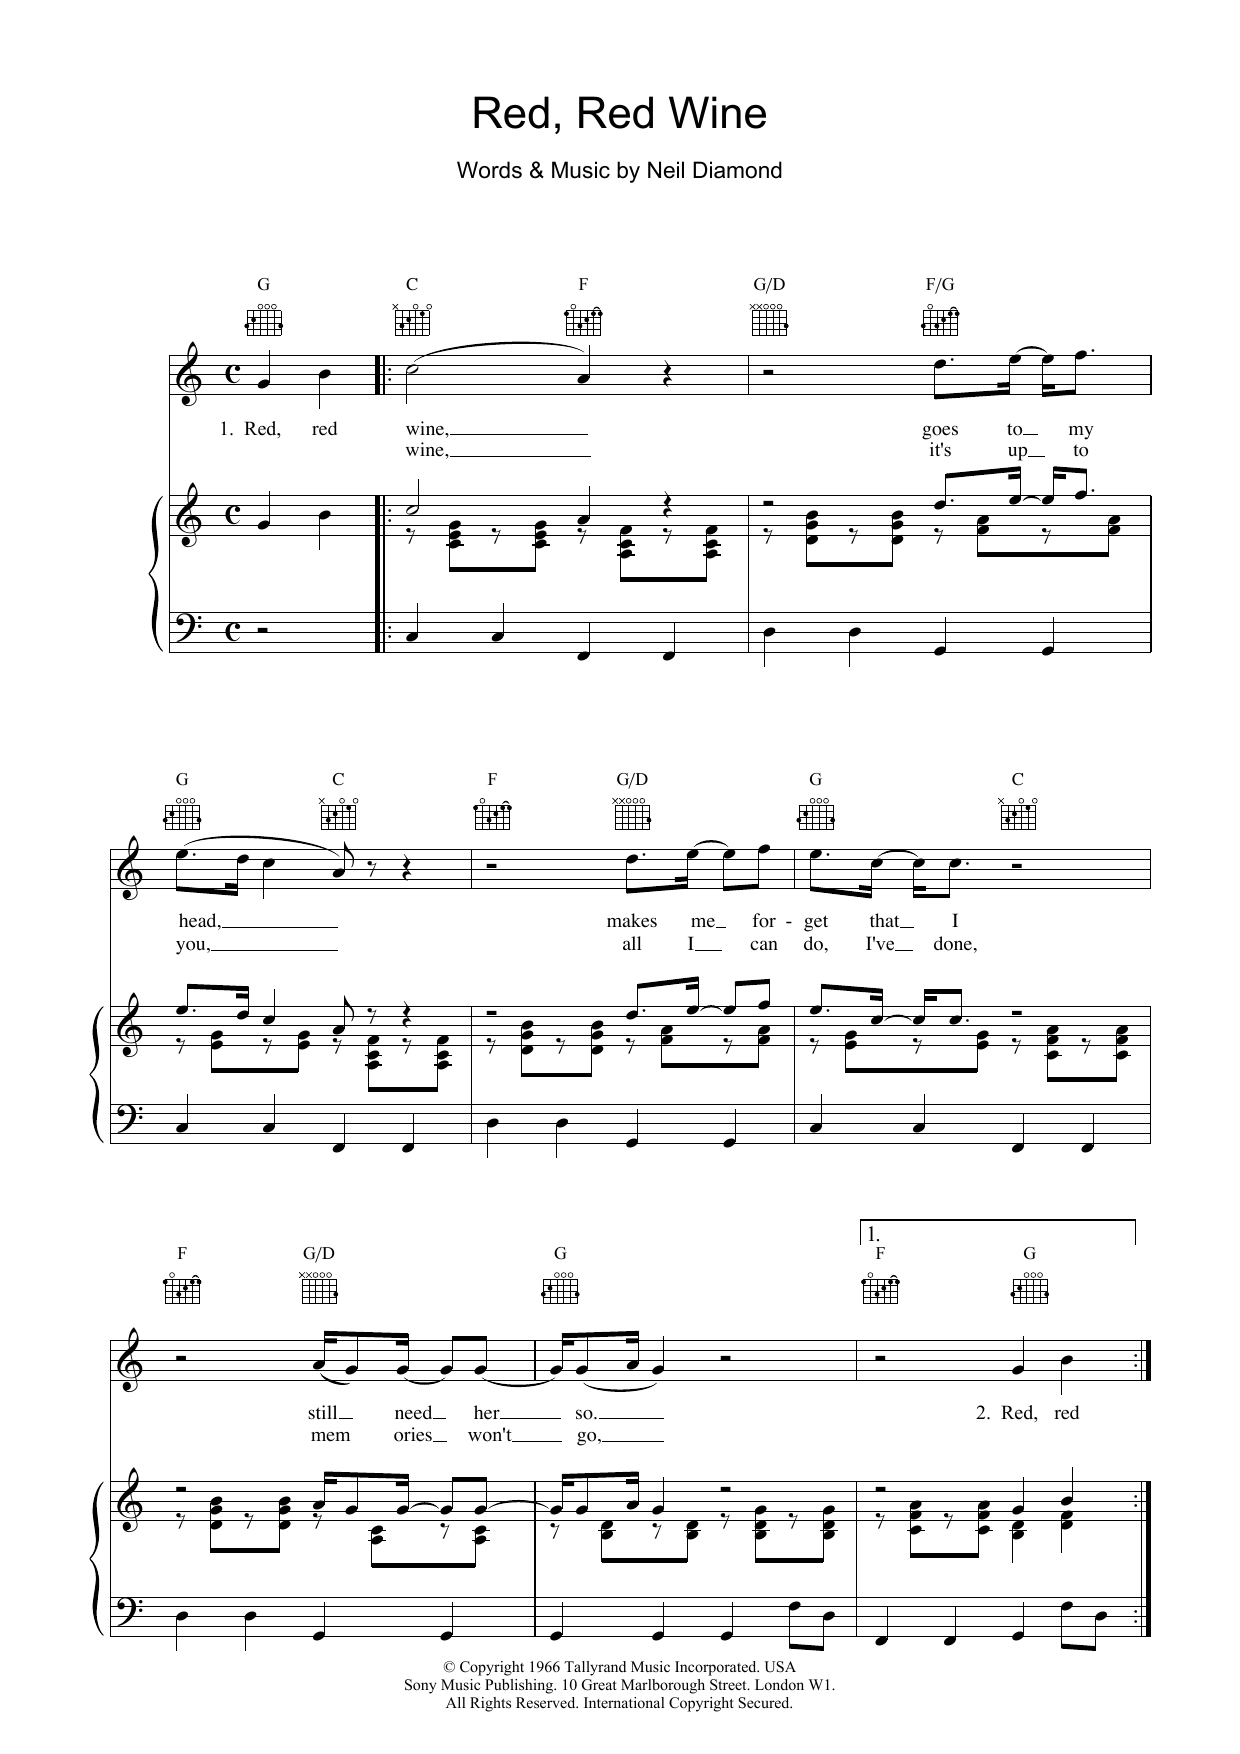 UB40 "Red, Red Wine" Sheet Music Notes, Chords | Pop Score Piano, Vocal & Guitar (Right-Hand Melody) Download Printable. SKU: 17137